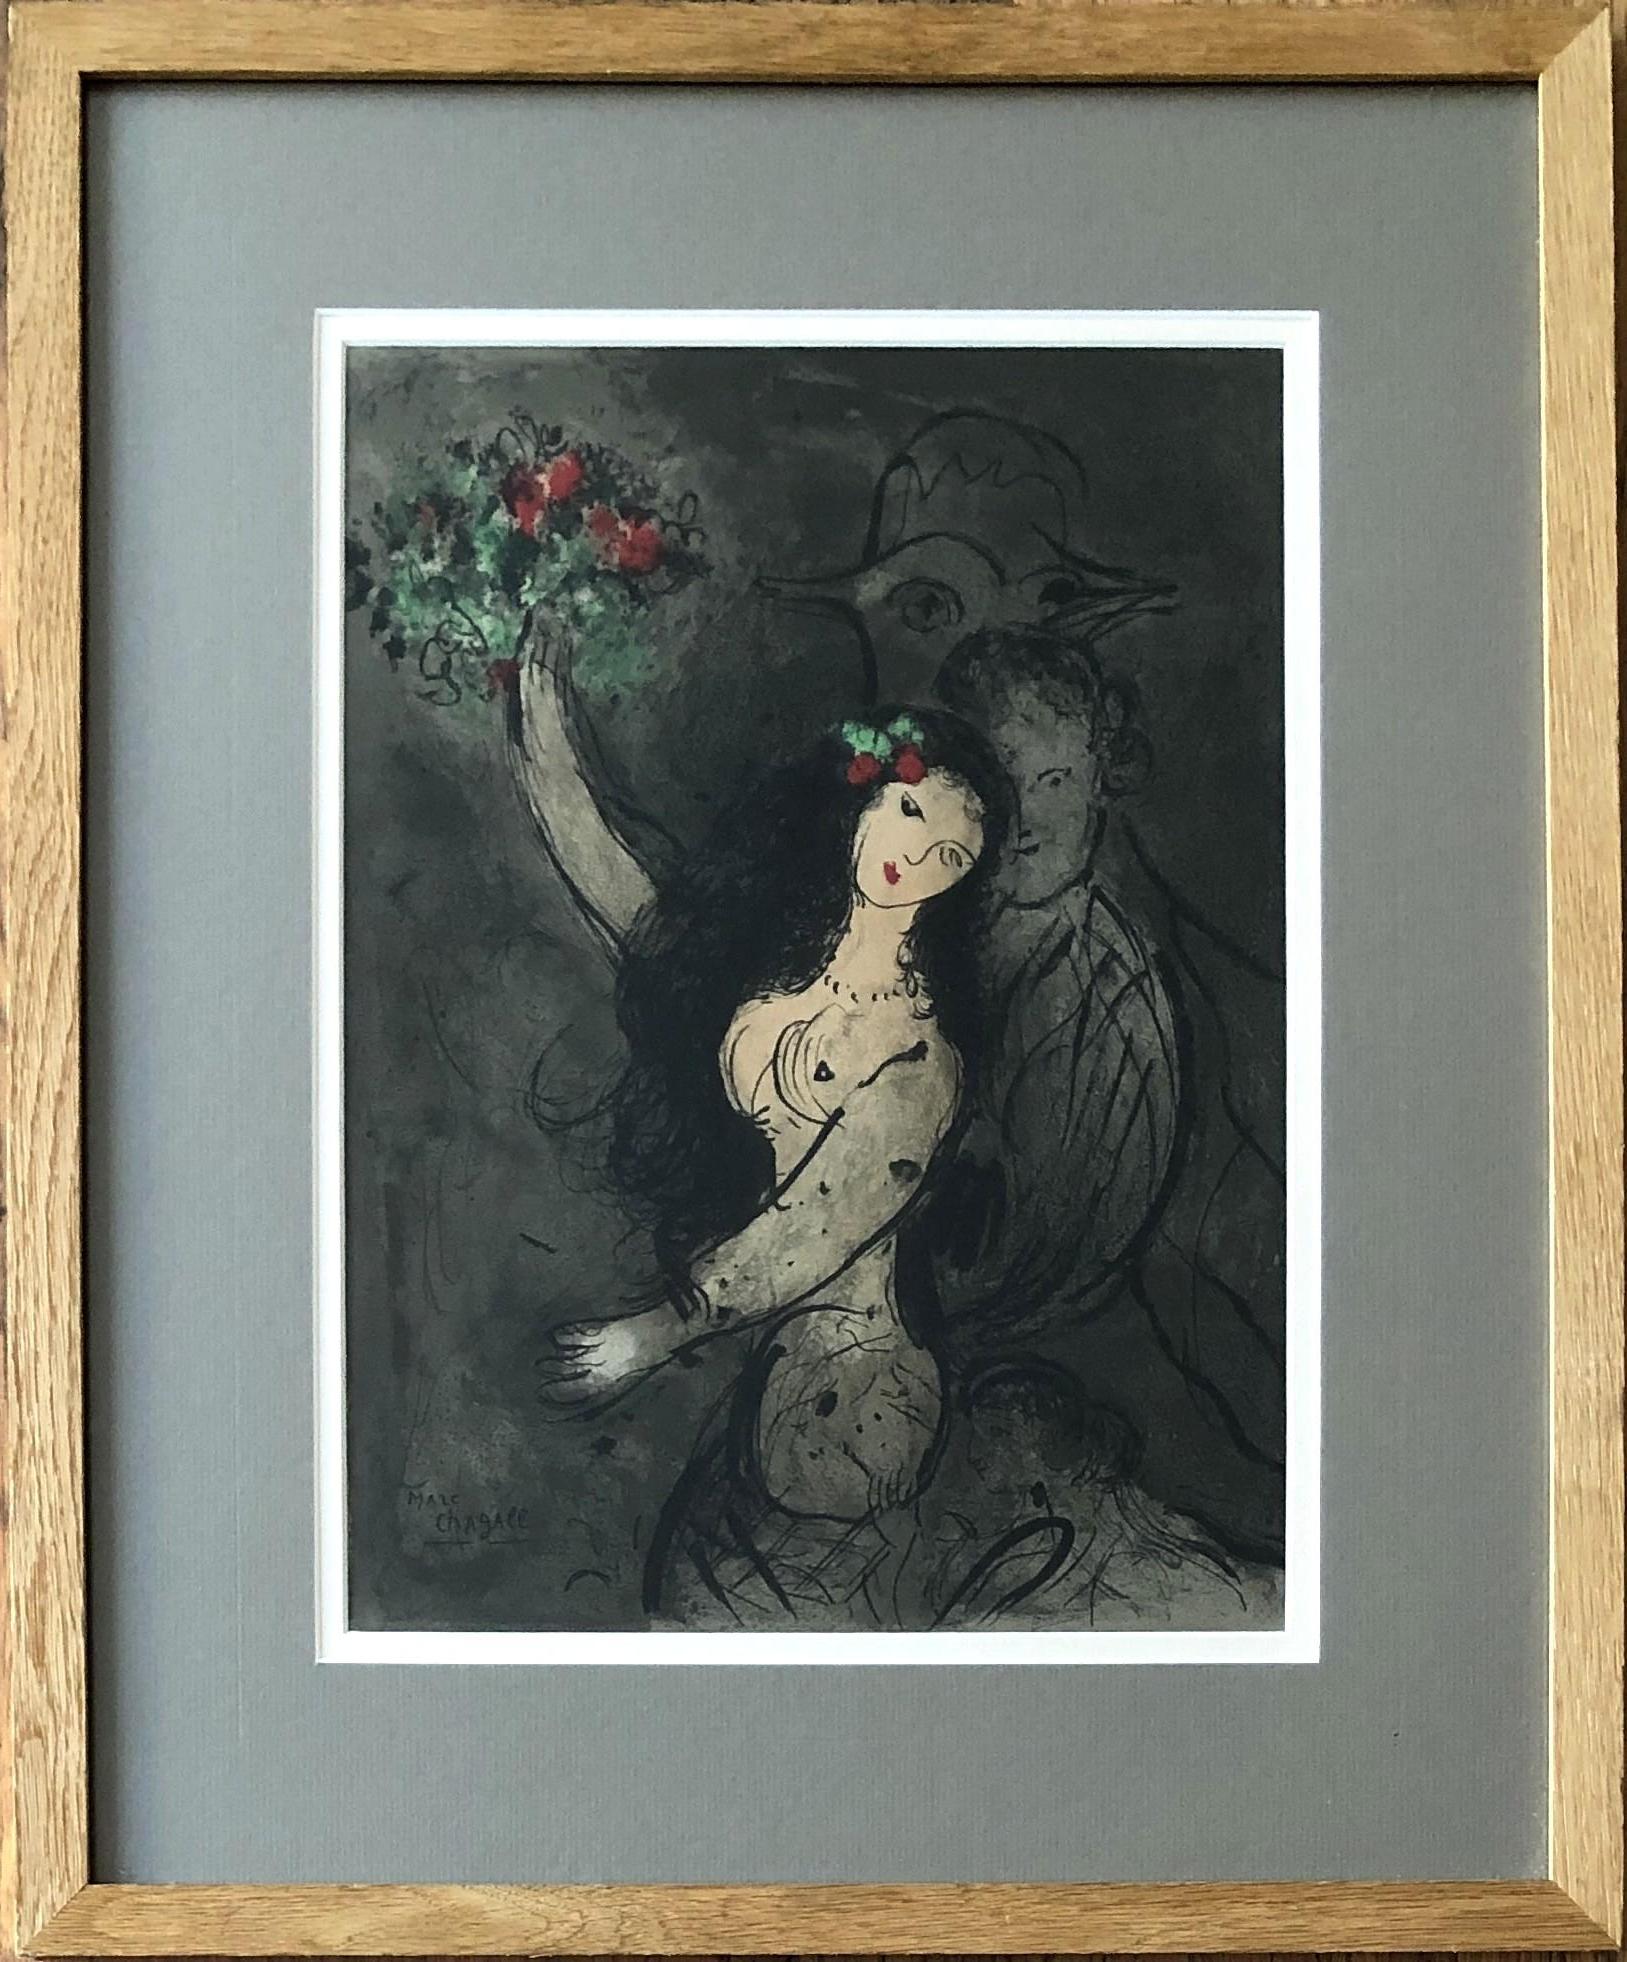 Woman With Flowers - Original Lithograph Signed in the Plate - Mourlot 383 - Print by Marc Chagall